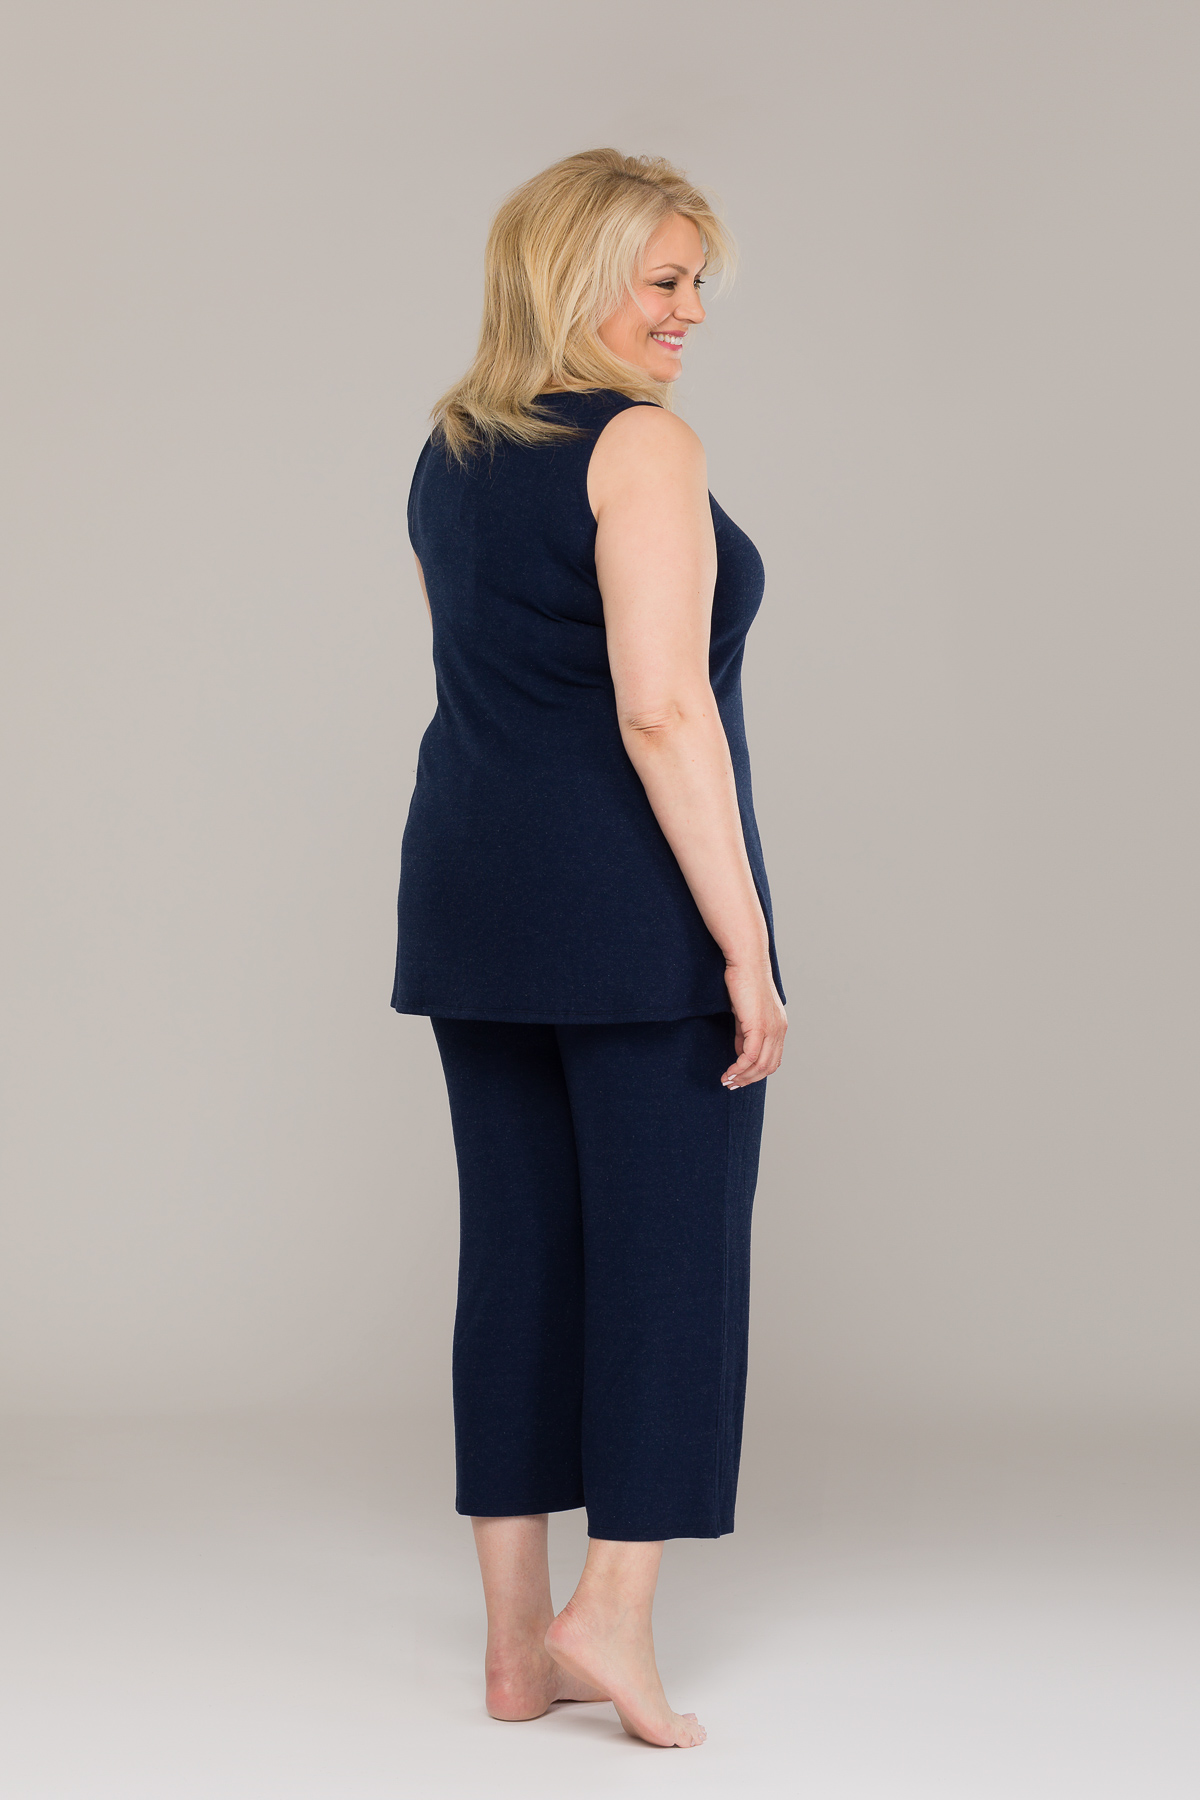 ALANI CULOTTE TROUSERS NAVY